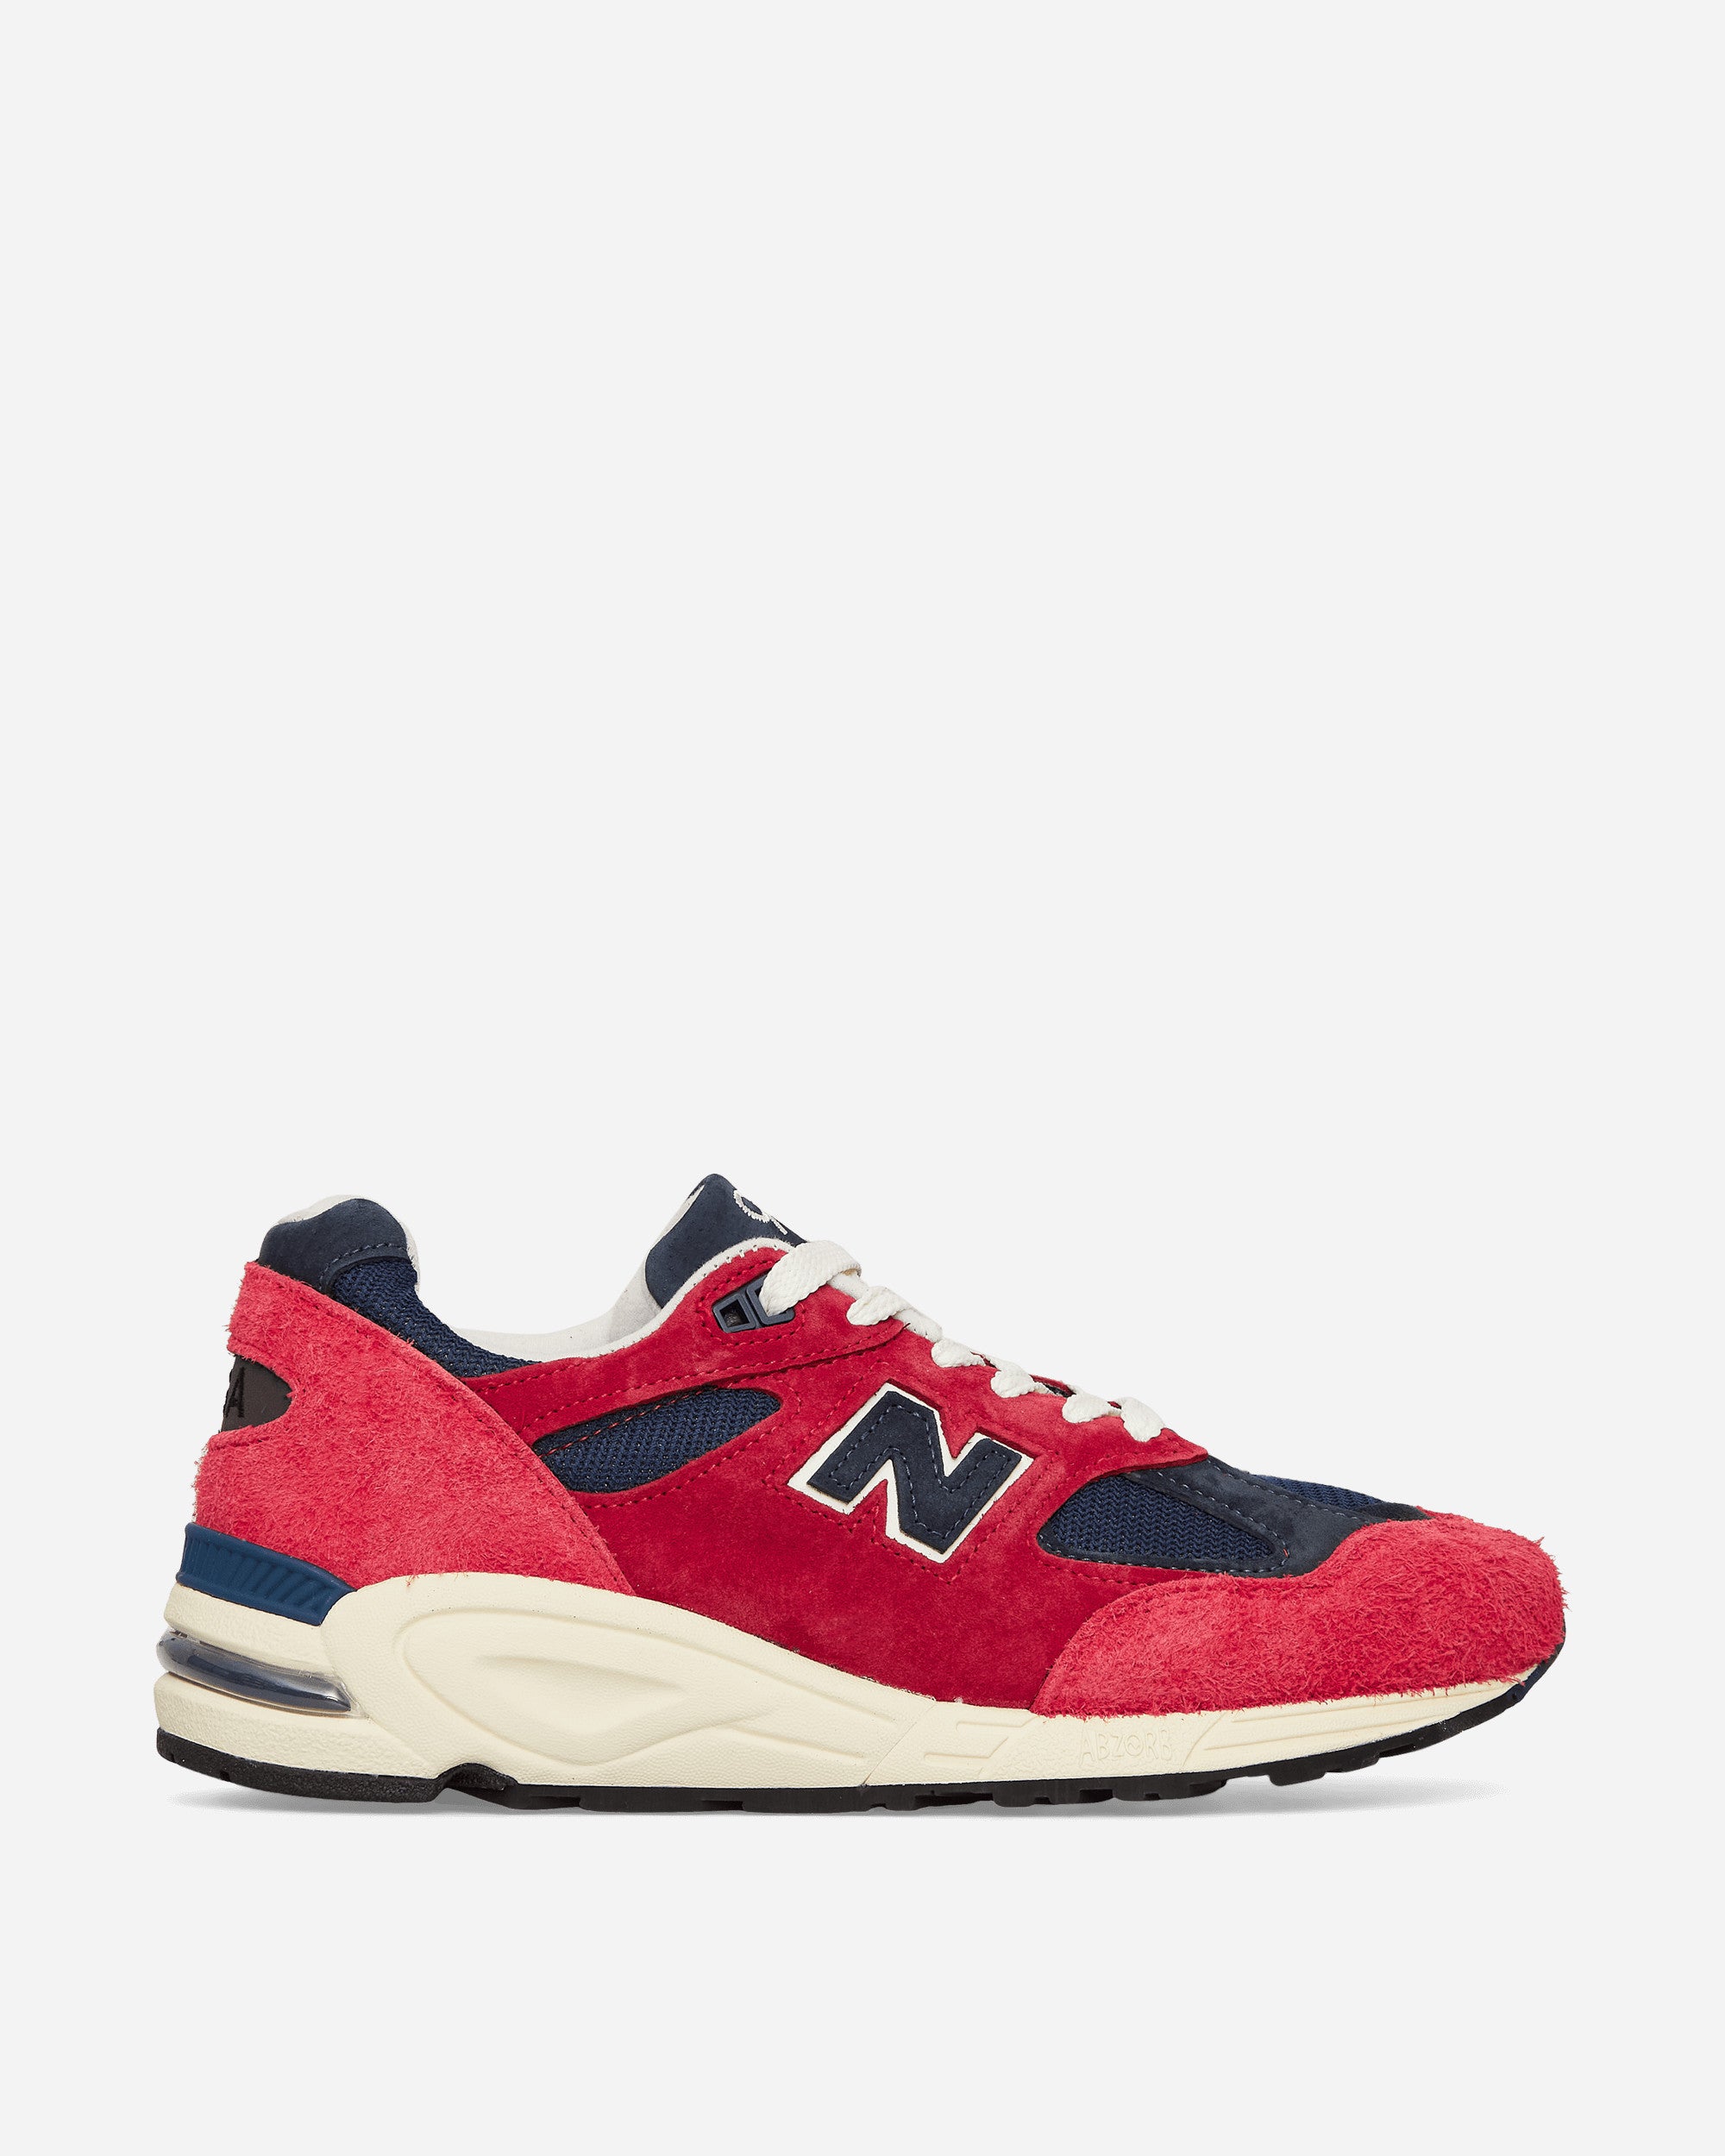 New Balance MADE in USA 990v2 Sneakers Red - Slam Jam® Official Store